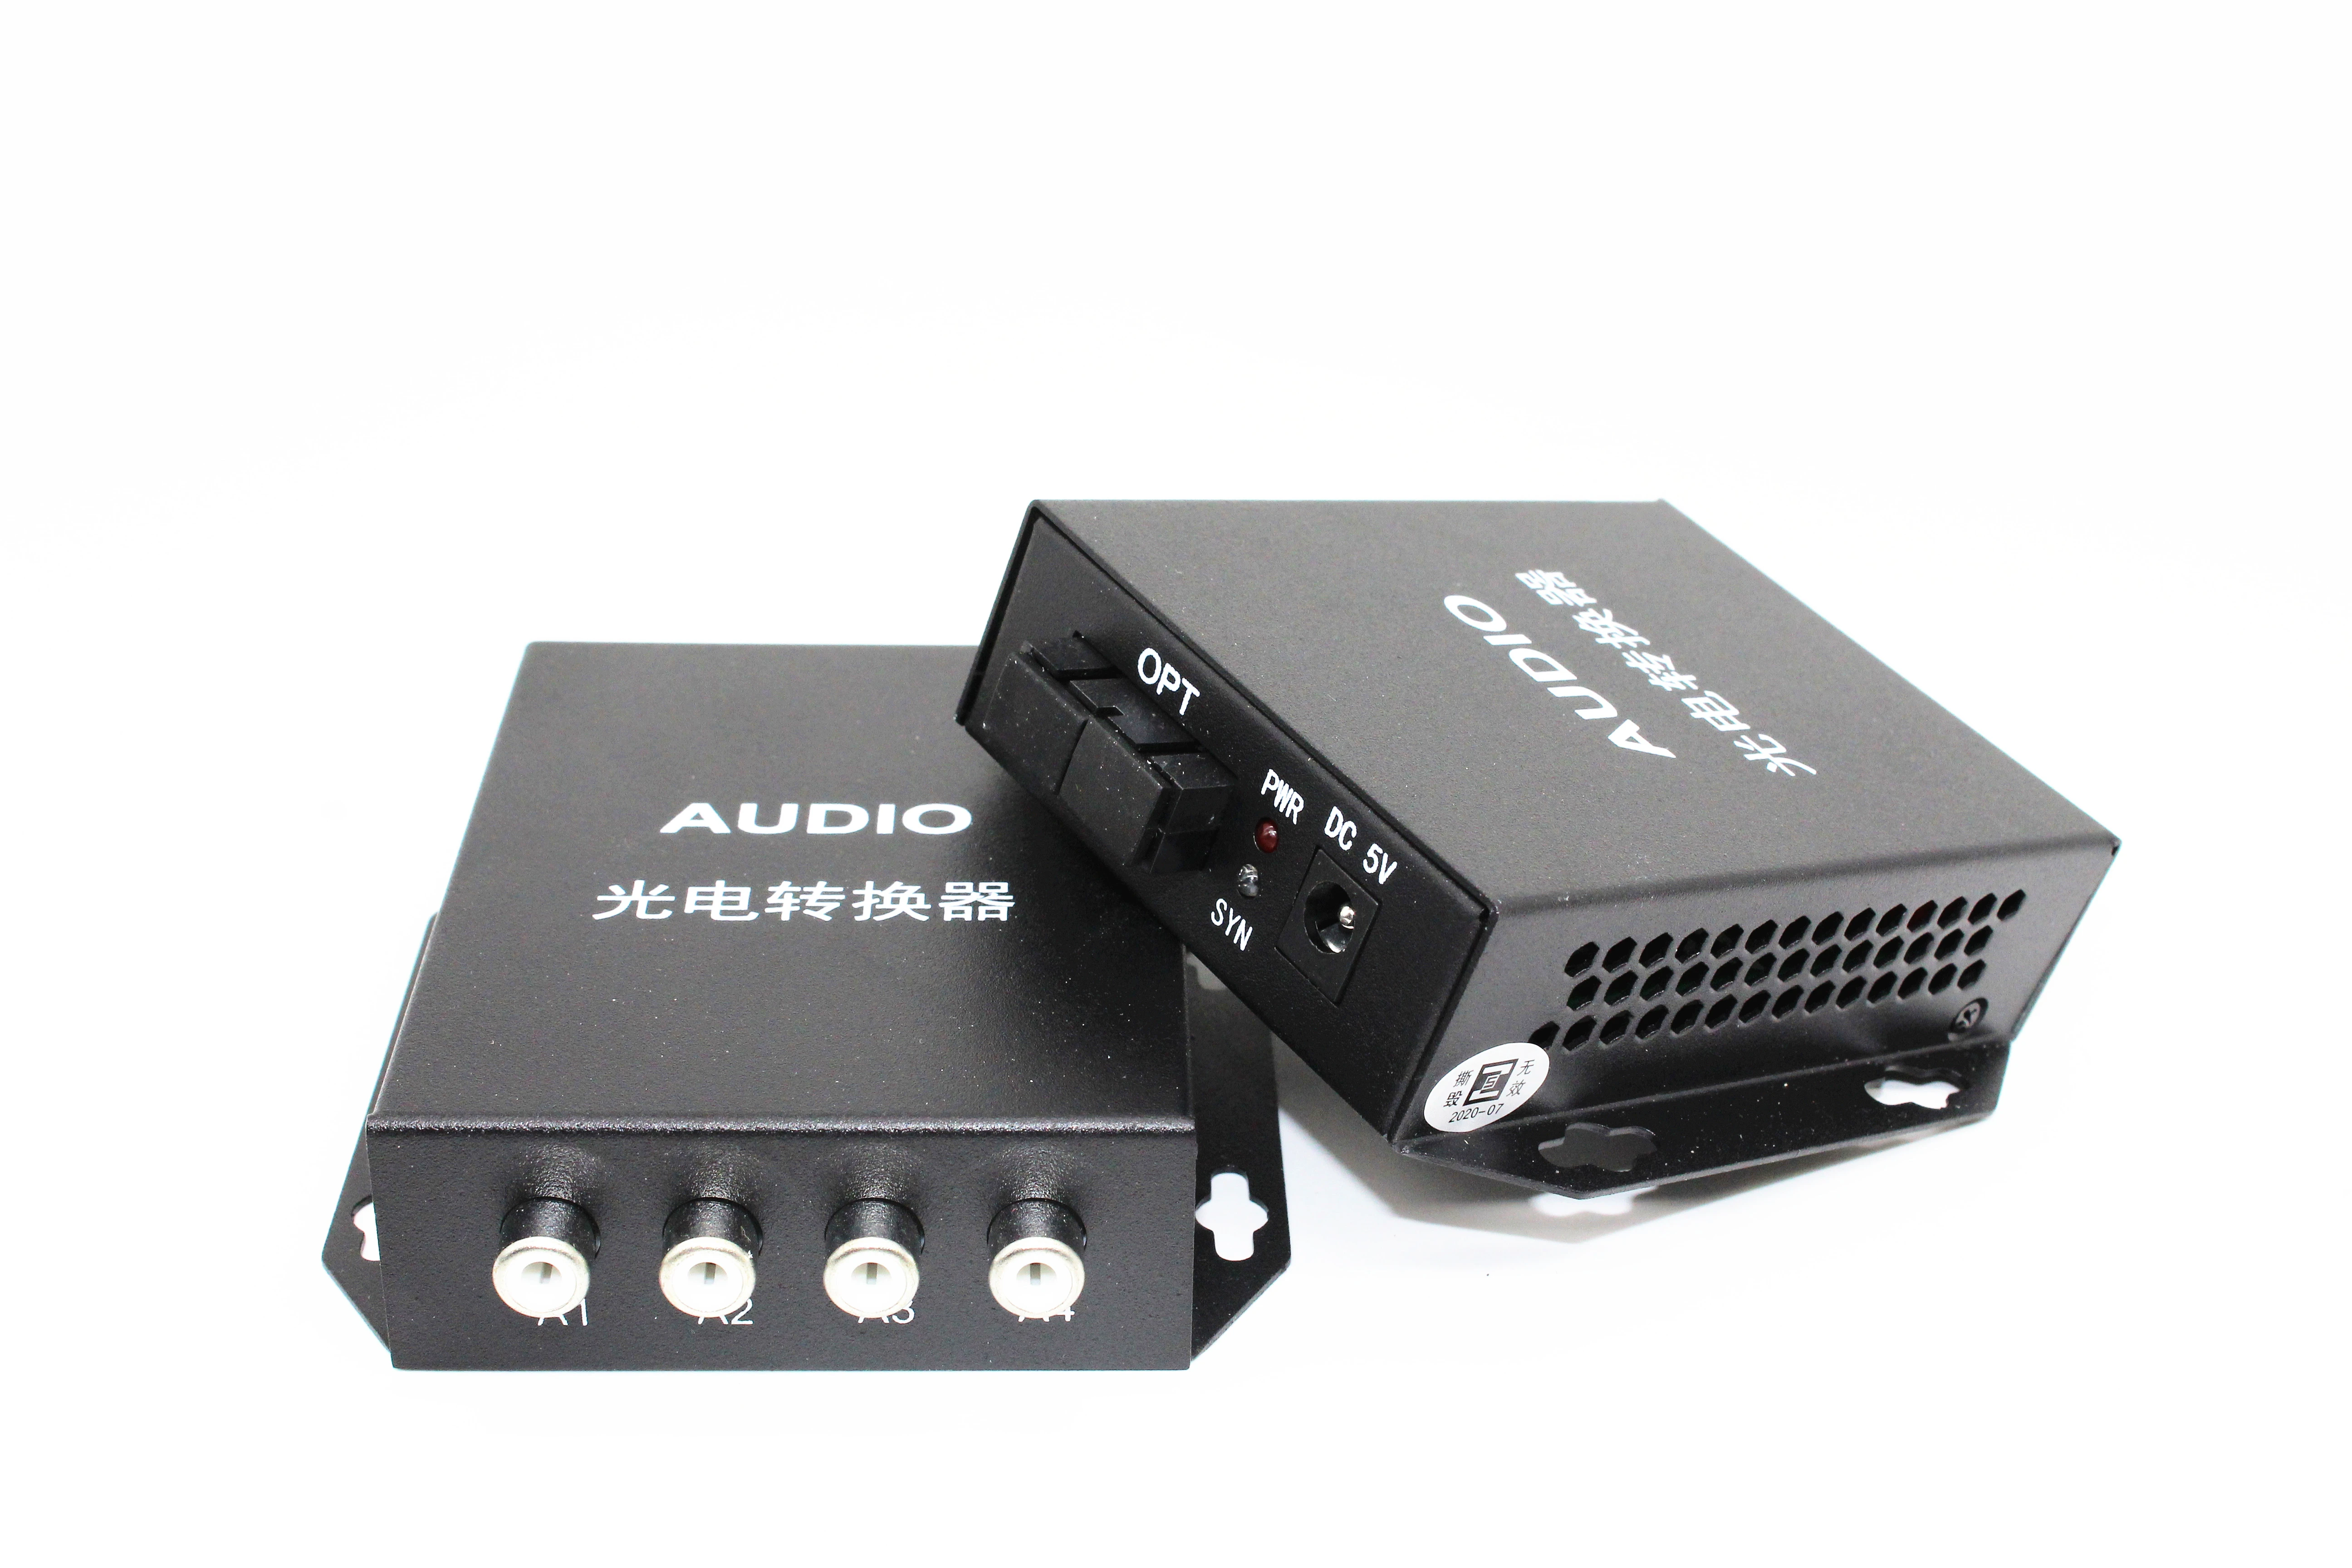 4-channel audio optical transceiver, campus broadcast optical transceiver, broadcast optical transceiver